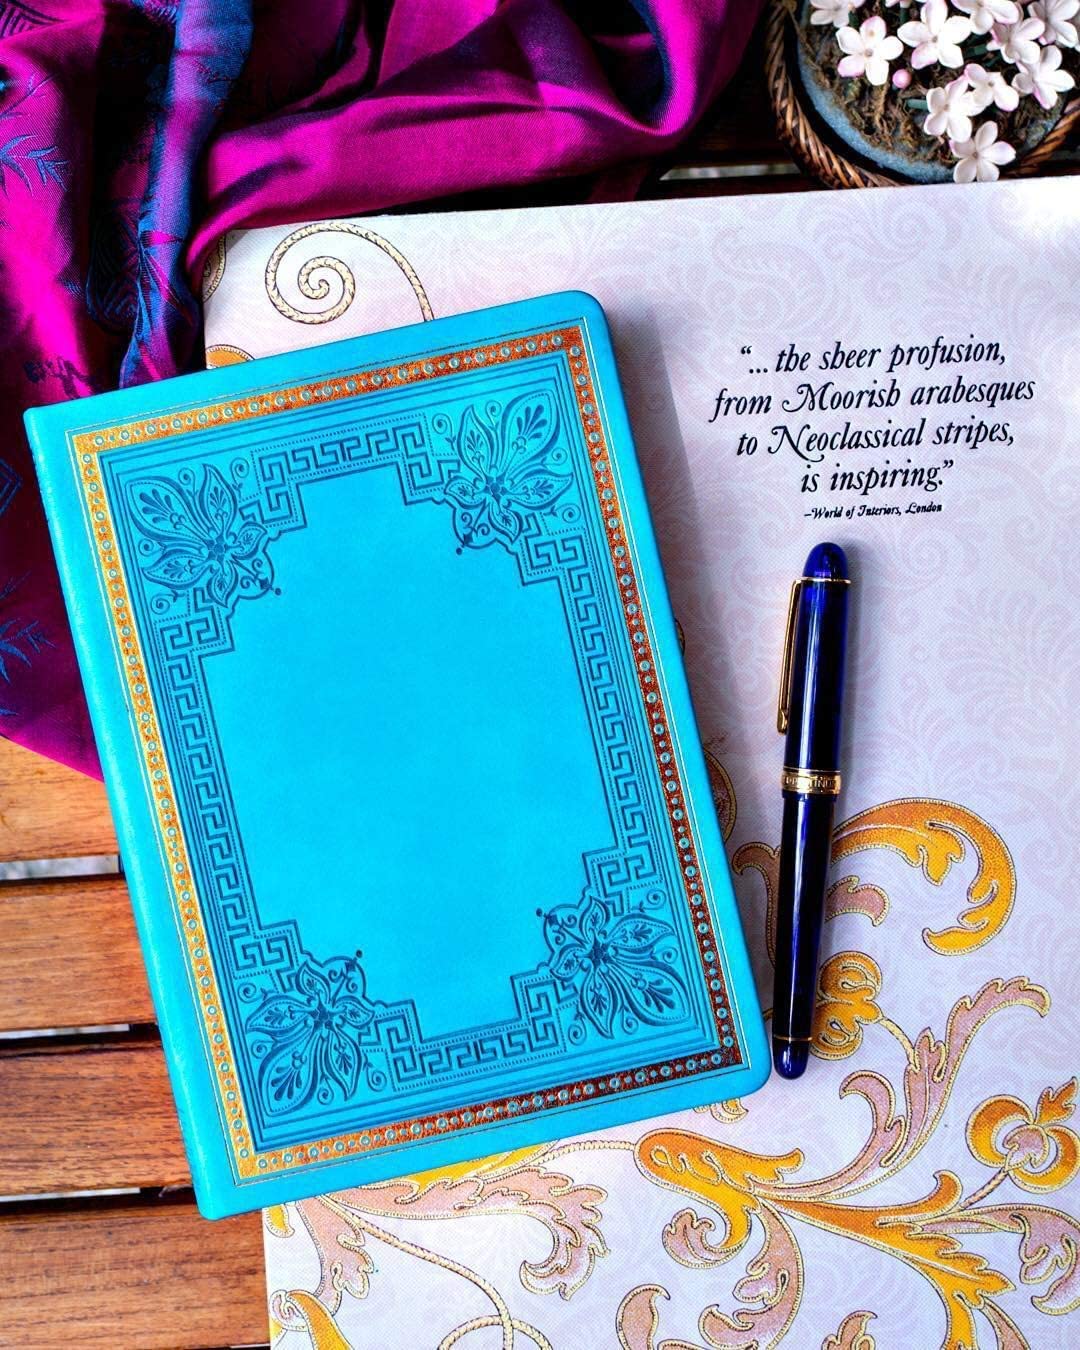 Victoria's Journals Vintage Style Diary for Men and Women – Use it for Writing, Note Taking, Poetry, Travel, Gratitude, Mindfulness, Self-Help, Daily Affirmations or a Prayer Journal 320p. (Teal)